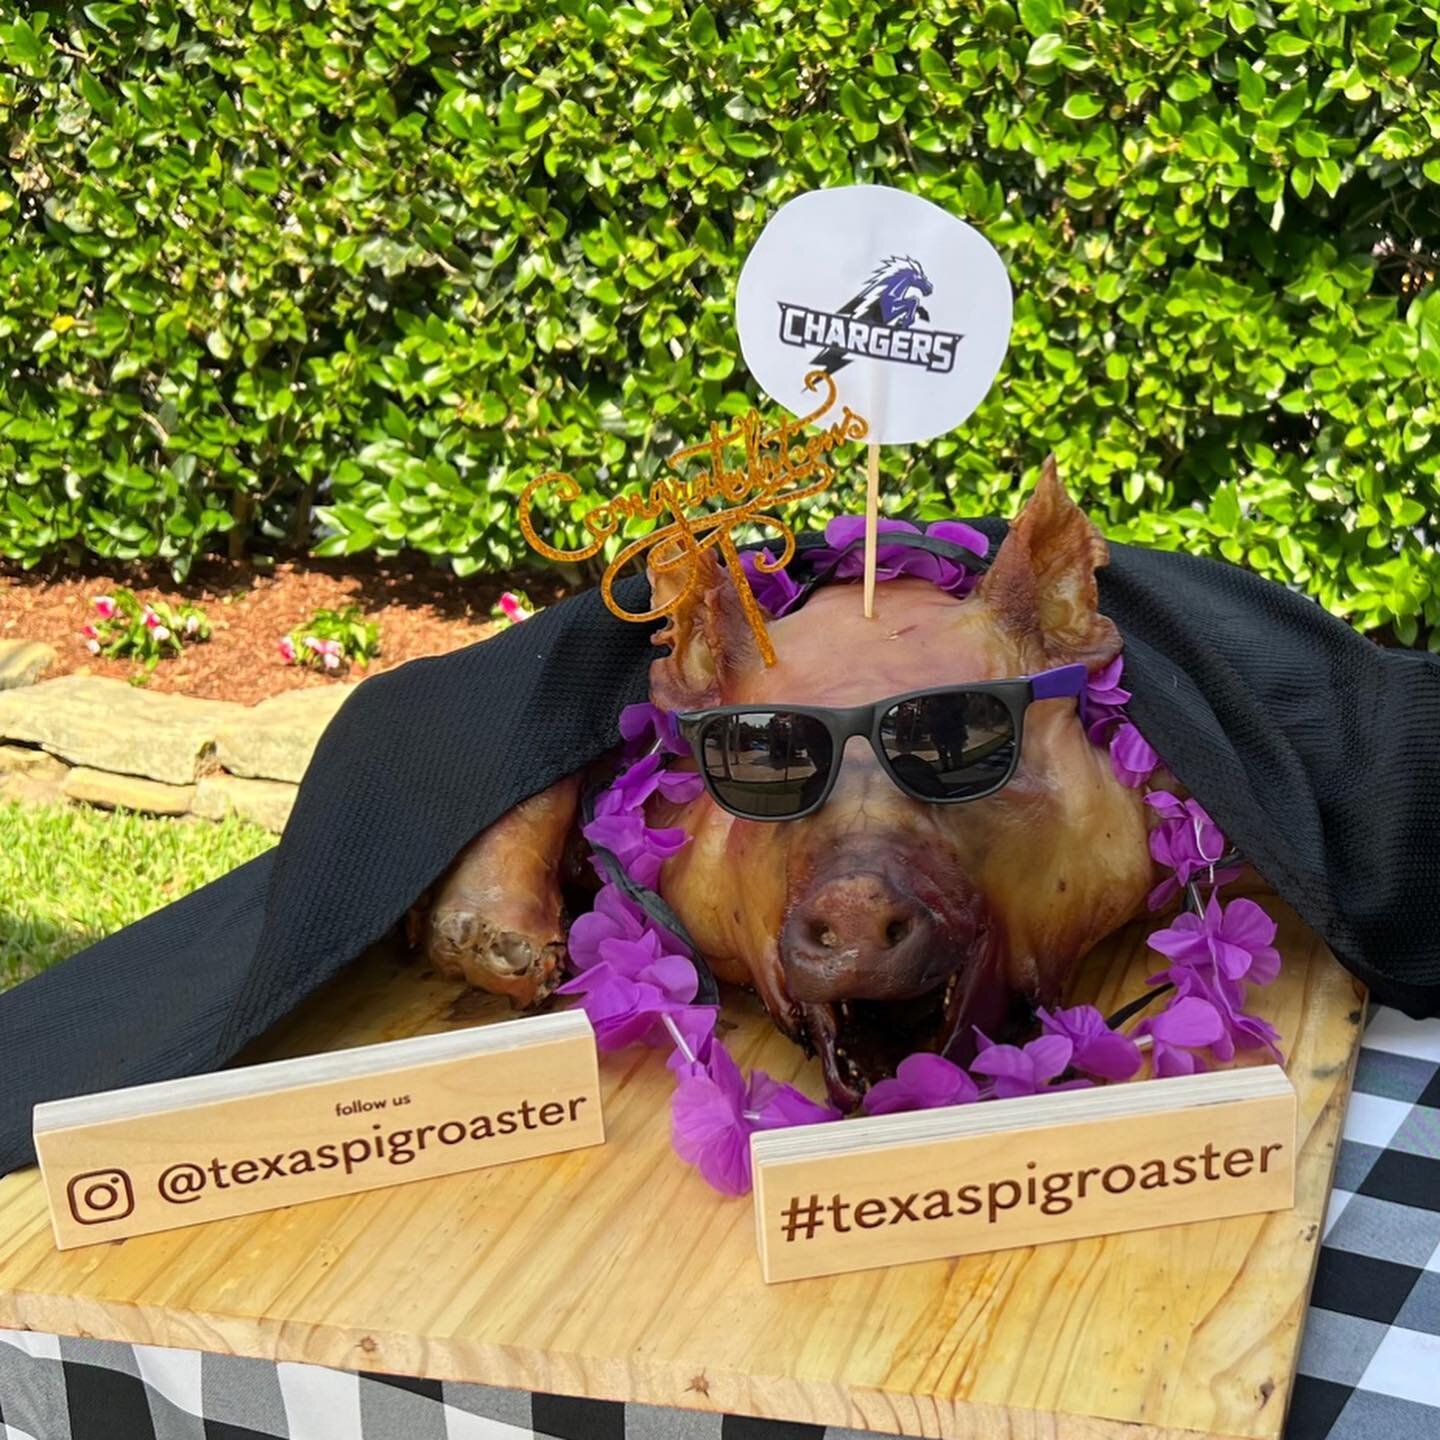 Our team&hellip; and our pigs&hellip;. had a great graduation season!  Congrats to all the graduates!

#foodhouston 
#thewoodlandstx 
#catering 
#houstontx 
#thewoodlandsfoodie
#cateringexperience